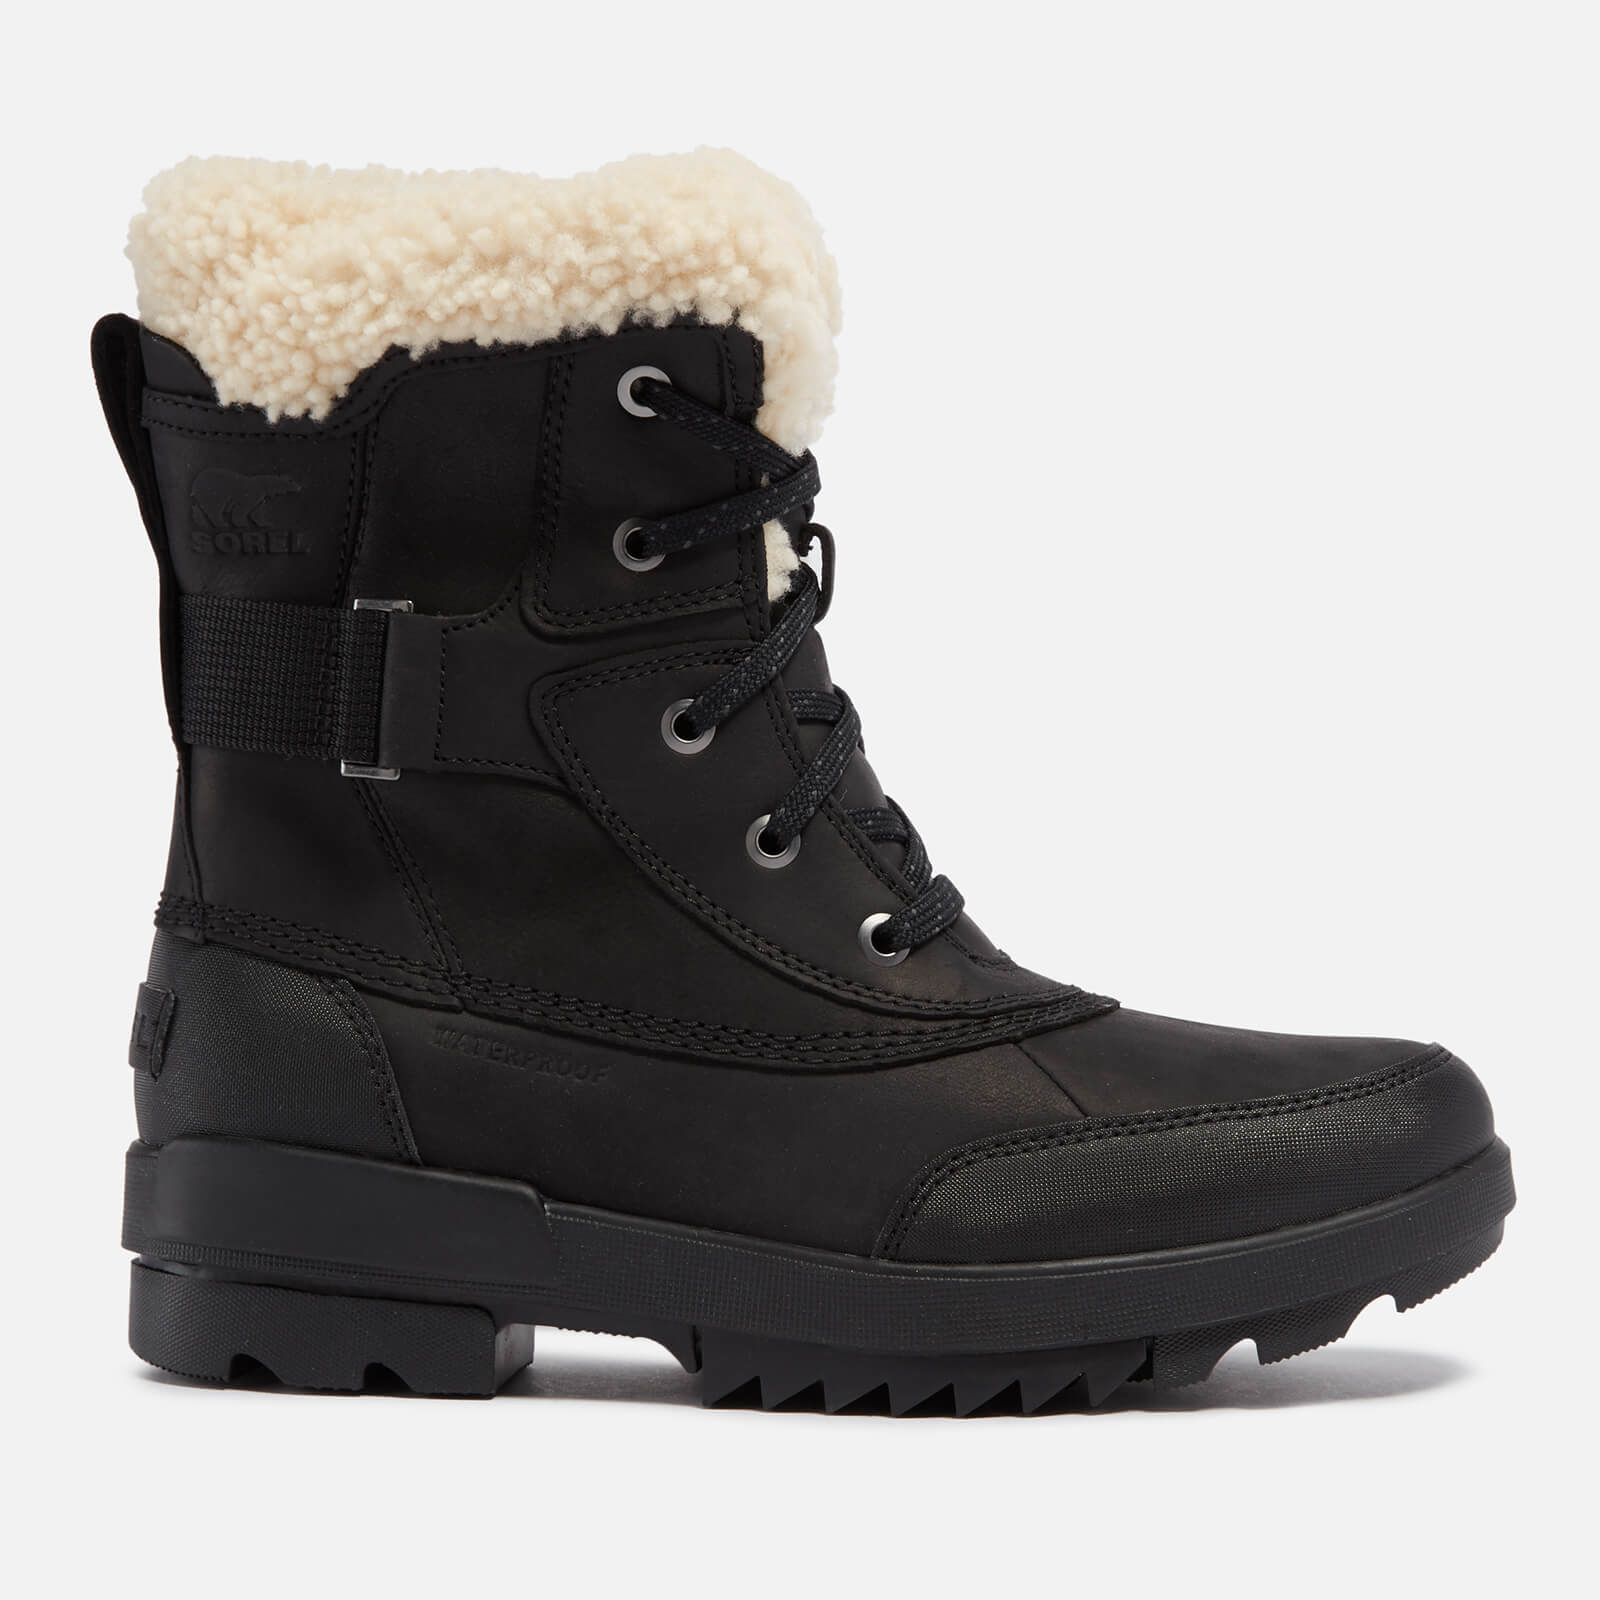 Sorel Torino Ii Parc Shearling, Rubber and Leather Boots - UK 3 von Sorel